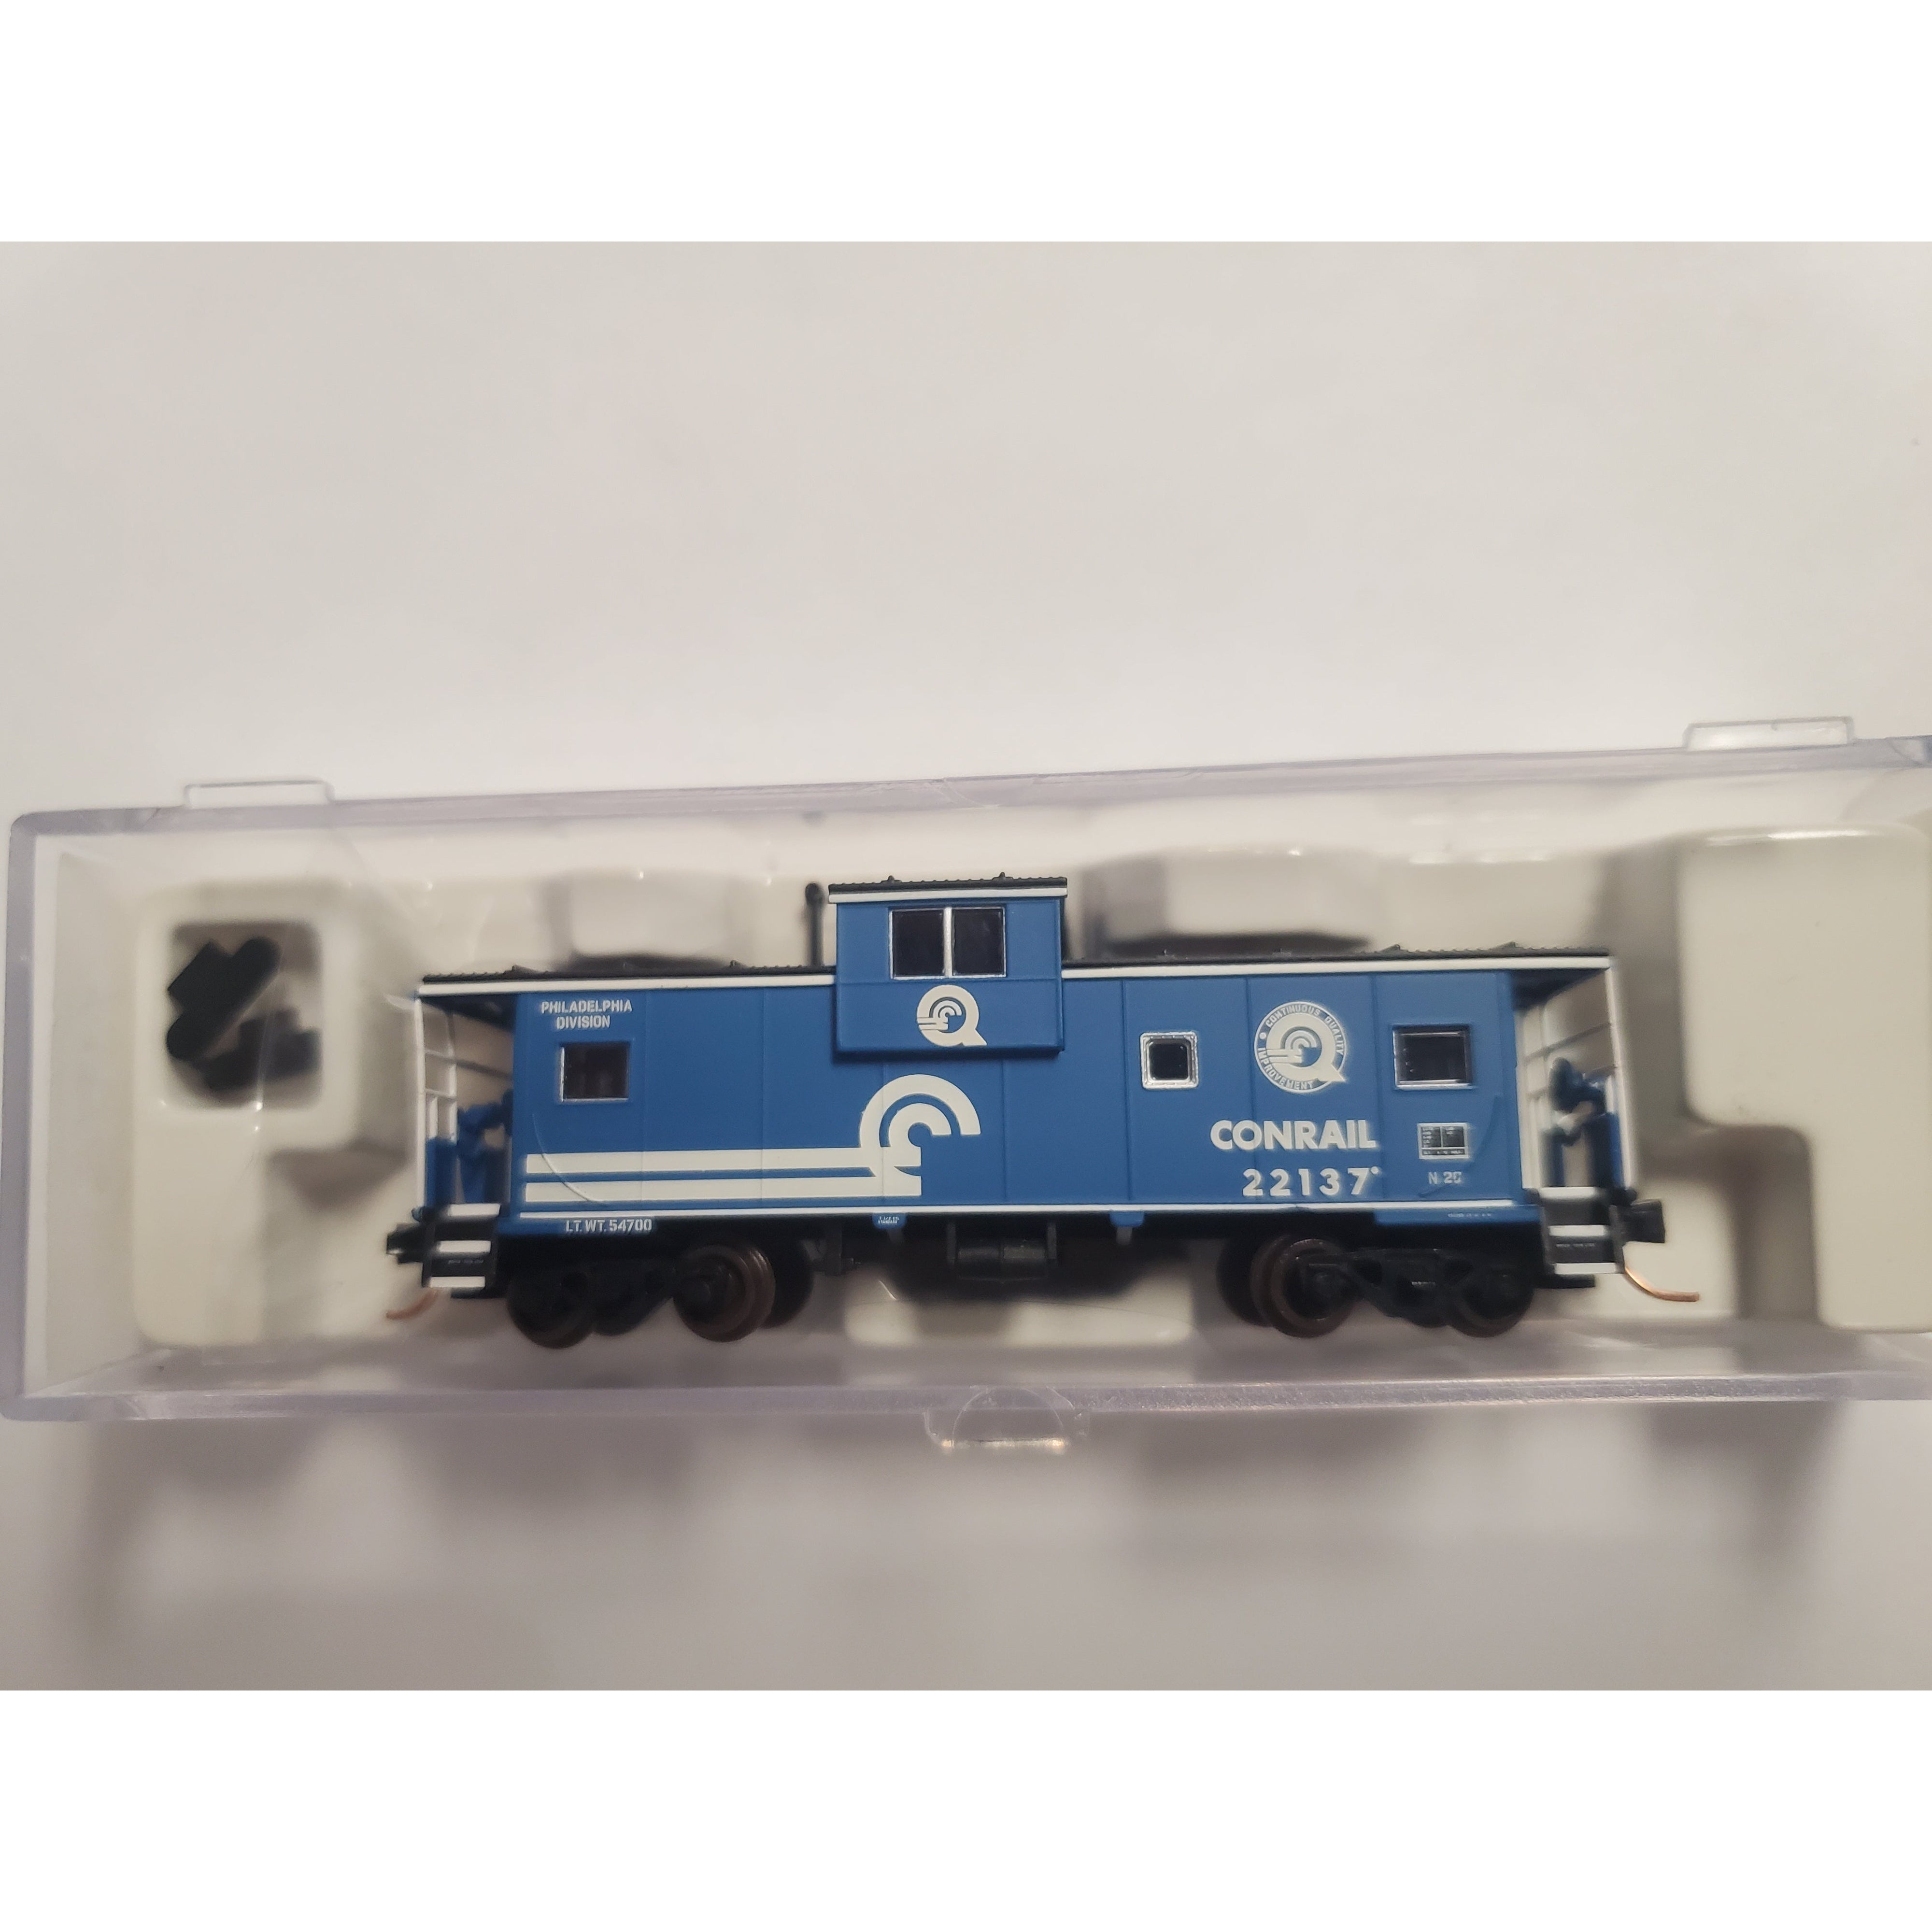 Pre-Owned - N Scale Atlas Caboose Conrail #22137